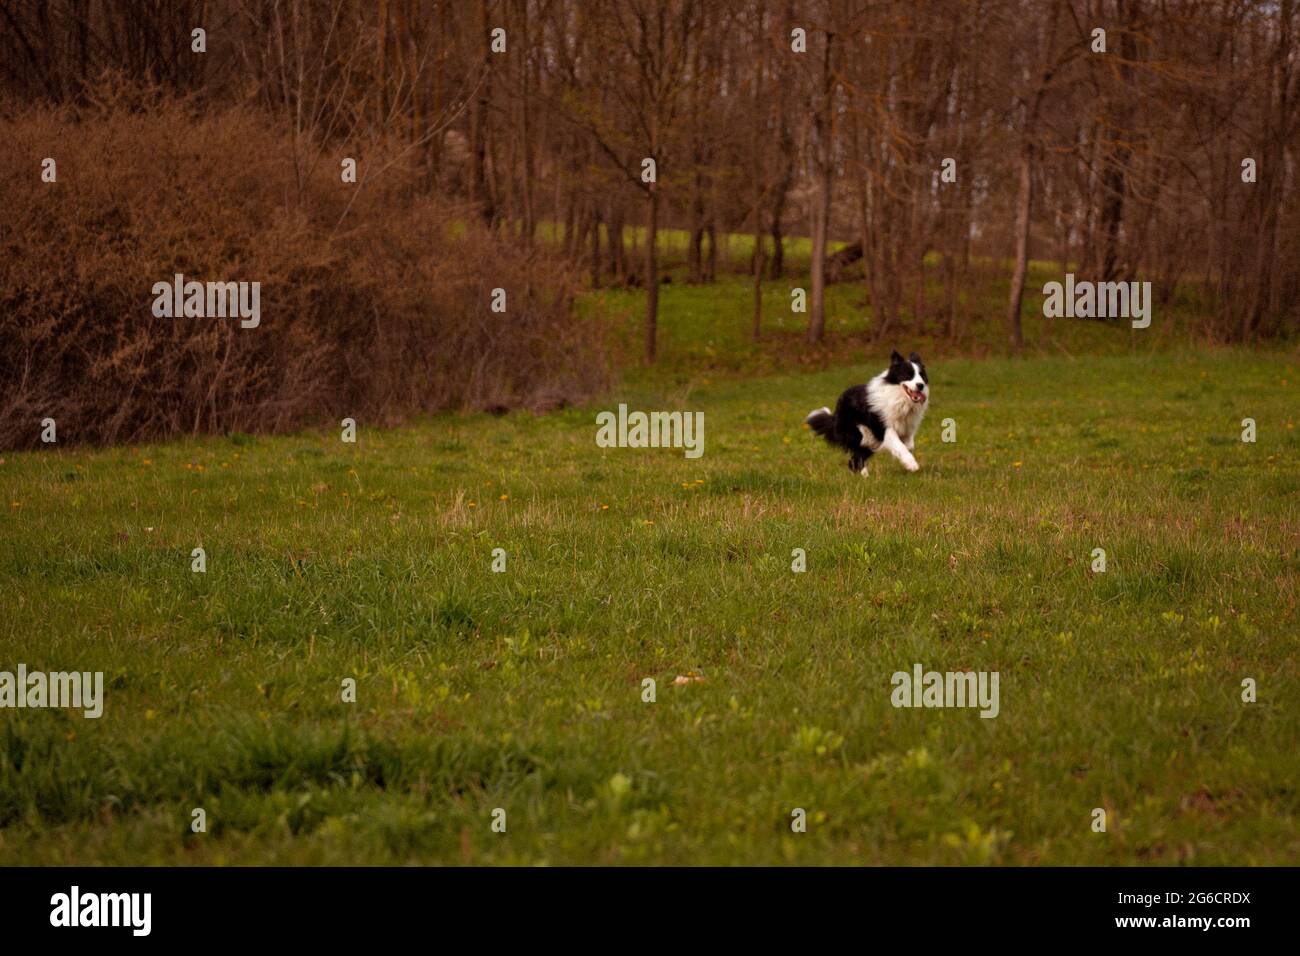 A border collie pure breed running in the forest, horizontal, landscape view Stock Photo